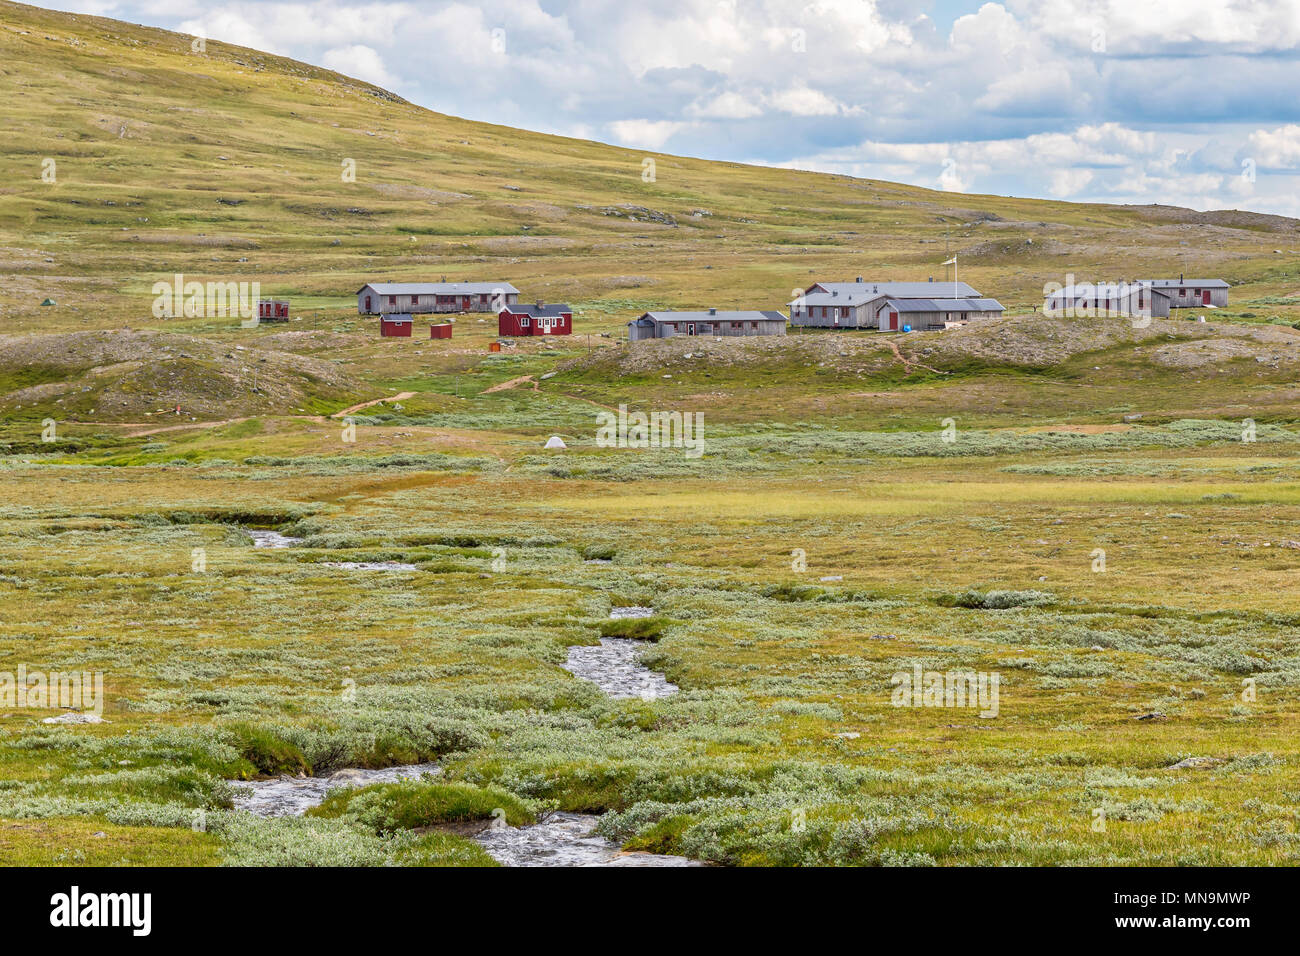 Helags Mountains lodge in the Swedish high country landscape Stock Photo